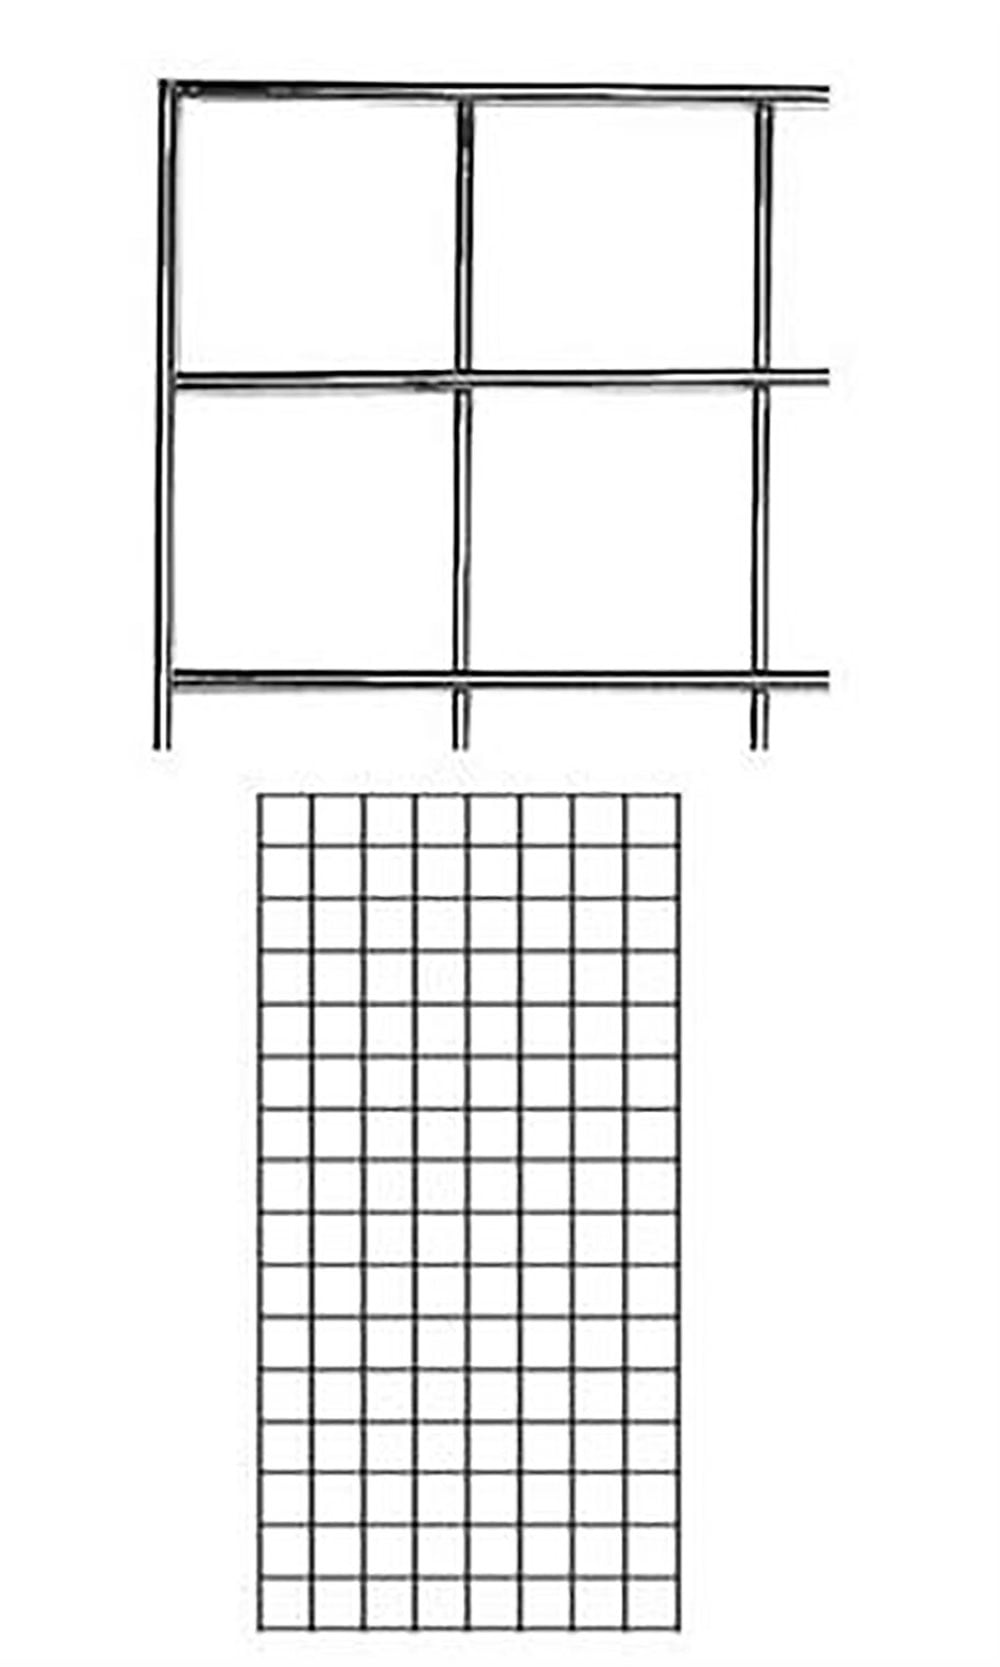 Only Hangers 2' x 6' Gridwall Tower with T-Base Floorstanding Display Kit+Hooks 